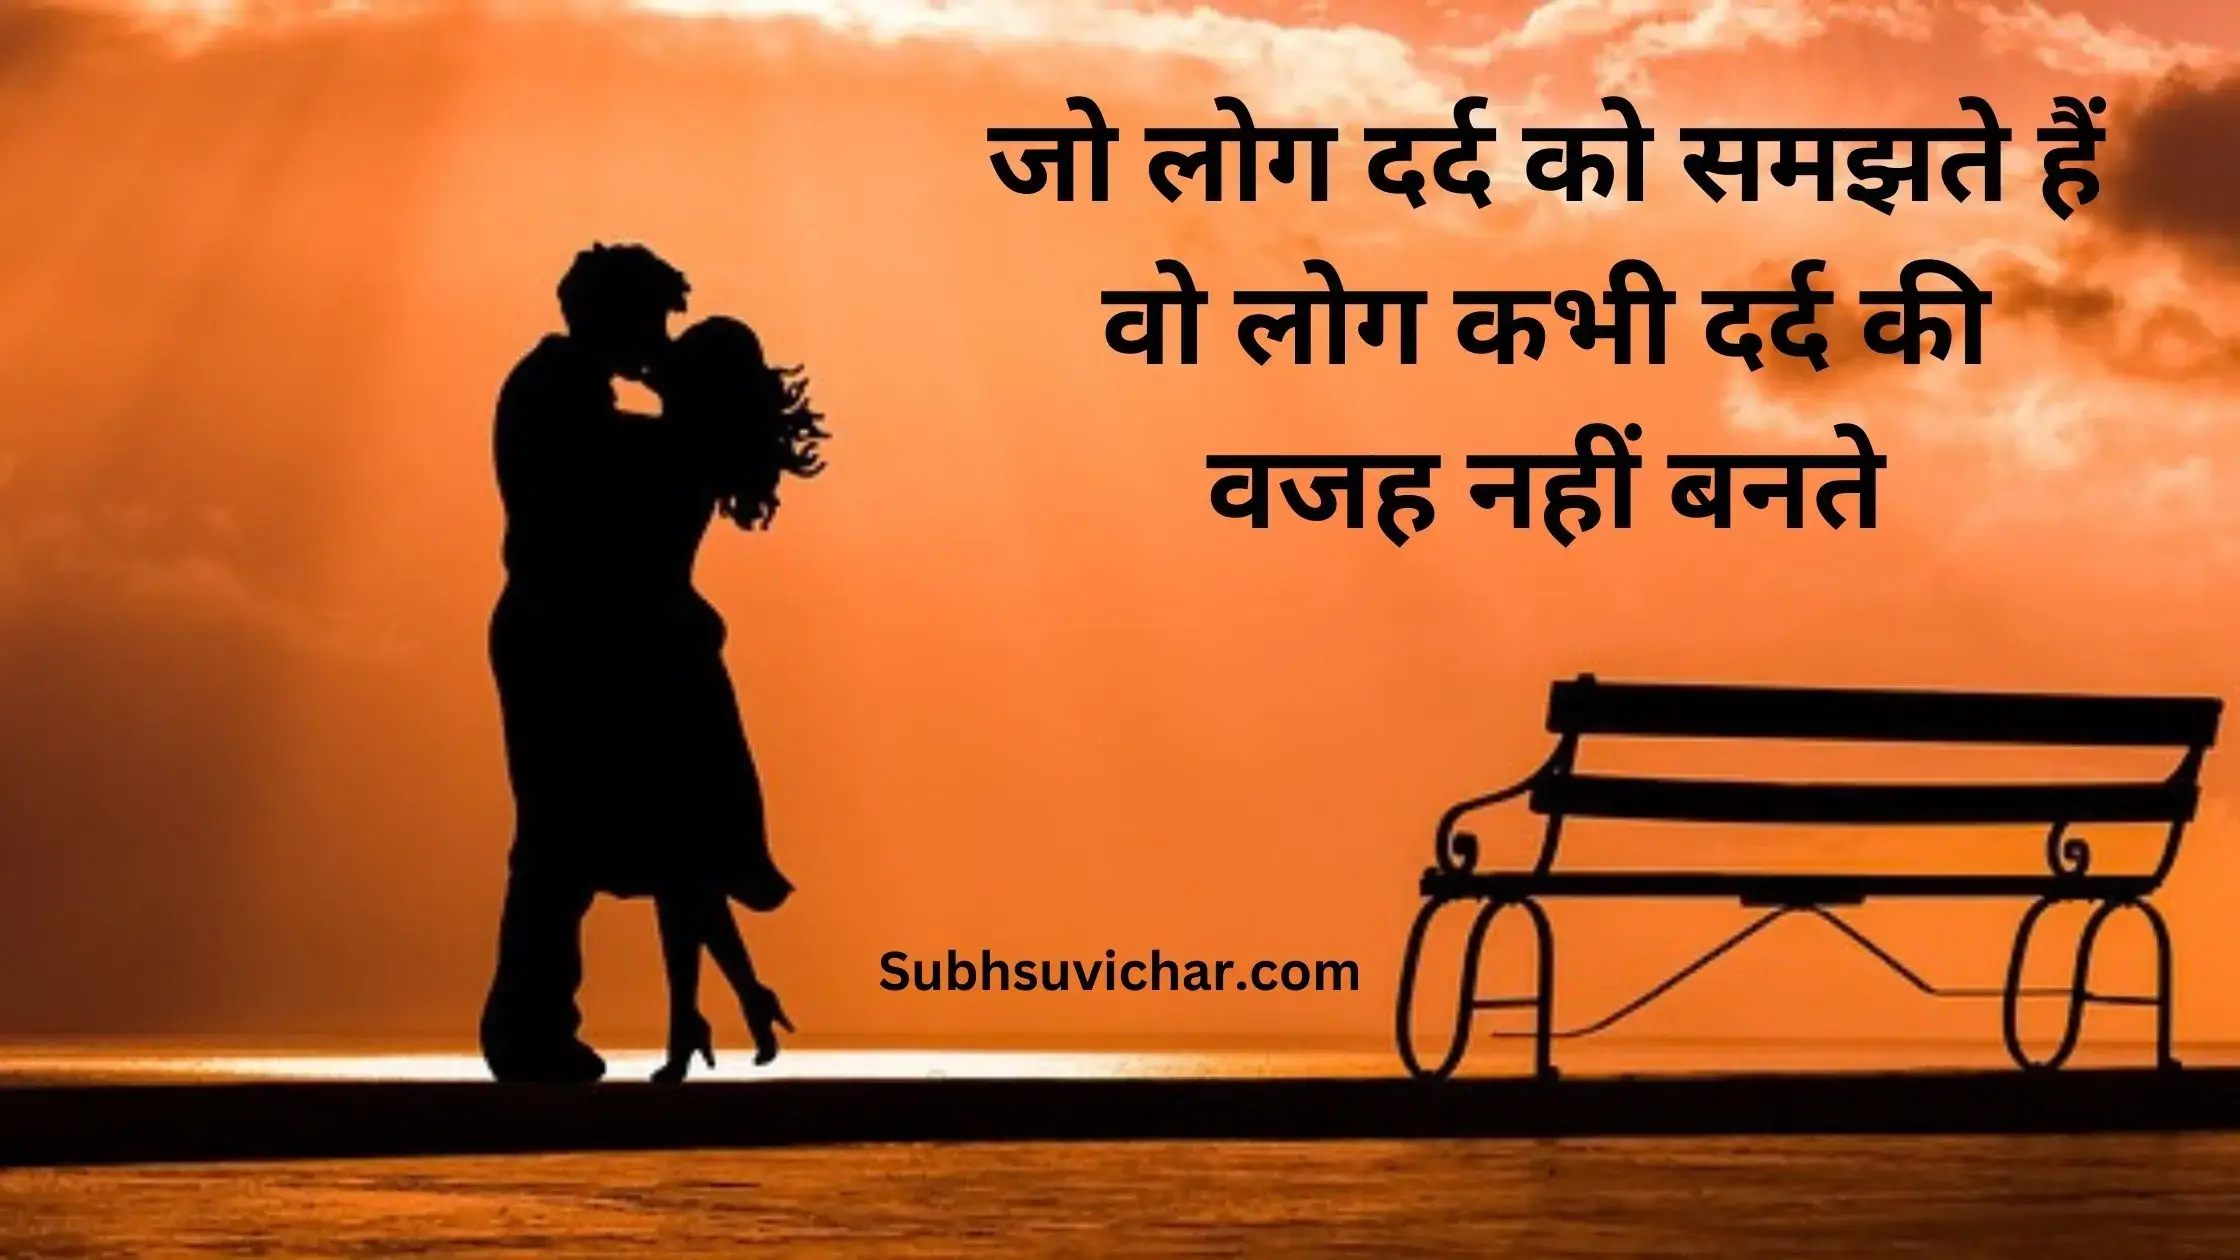 This post contains huge collection of breakup shayari in hindi font with high quality of images for your whatsapp and facebook status.